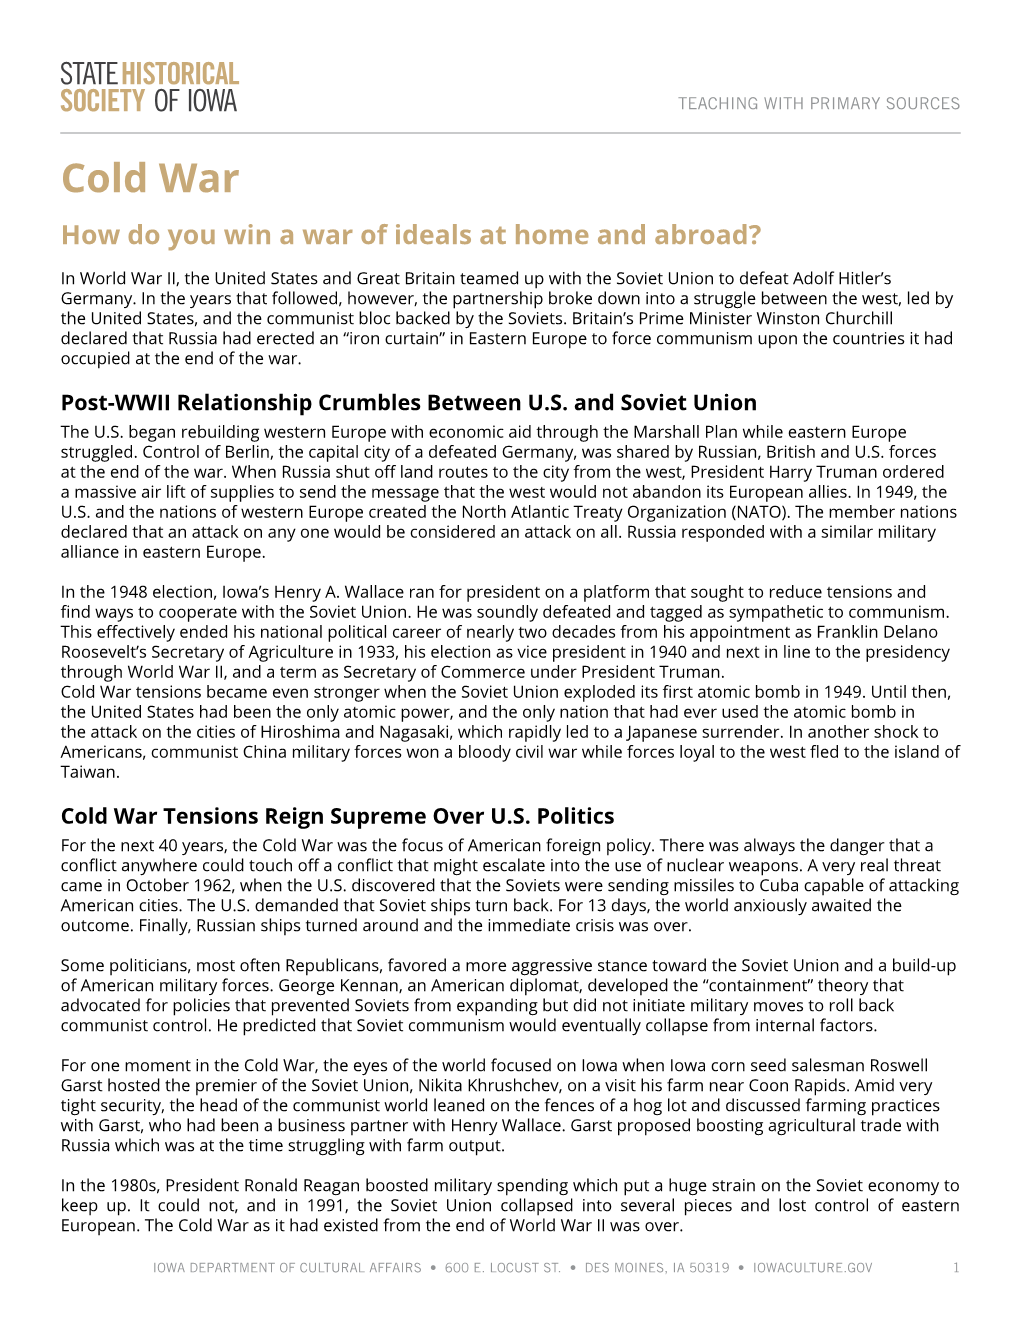 Cold War How Do You Win a War of Ideals at Home and Abroad?